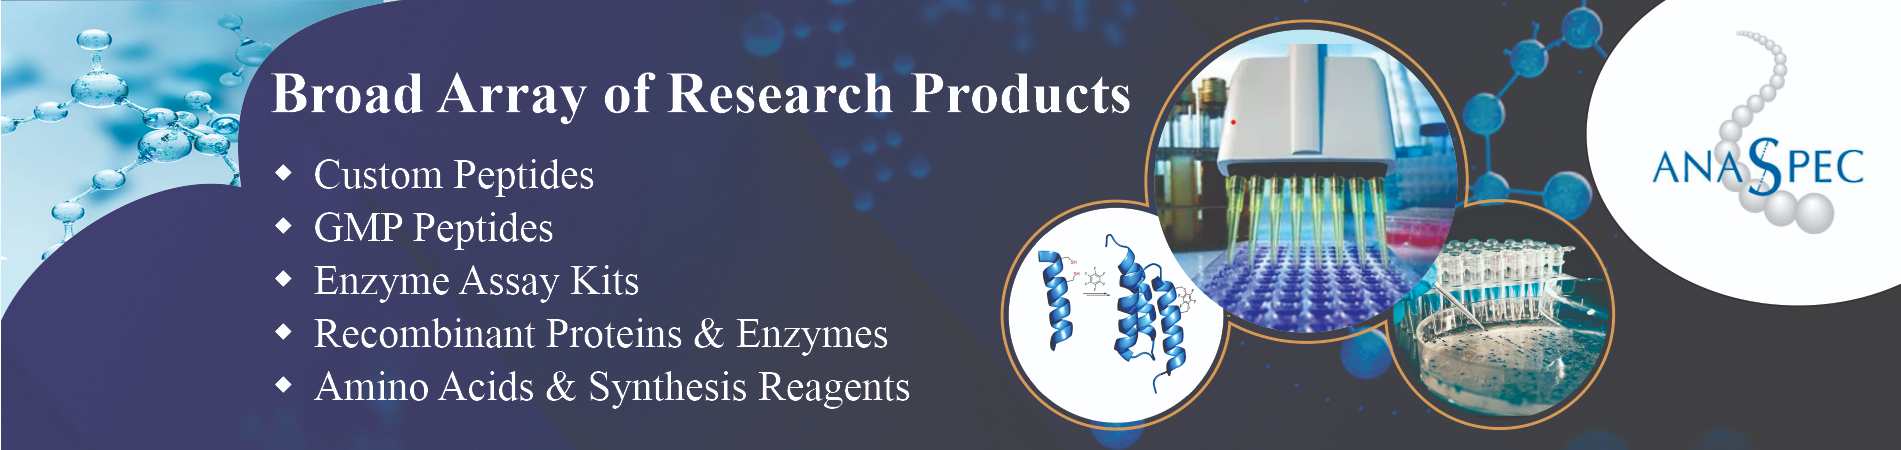 Broad Array of Research Products